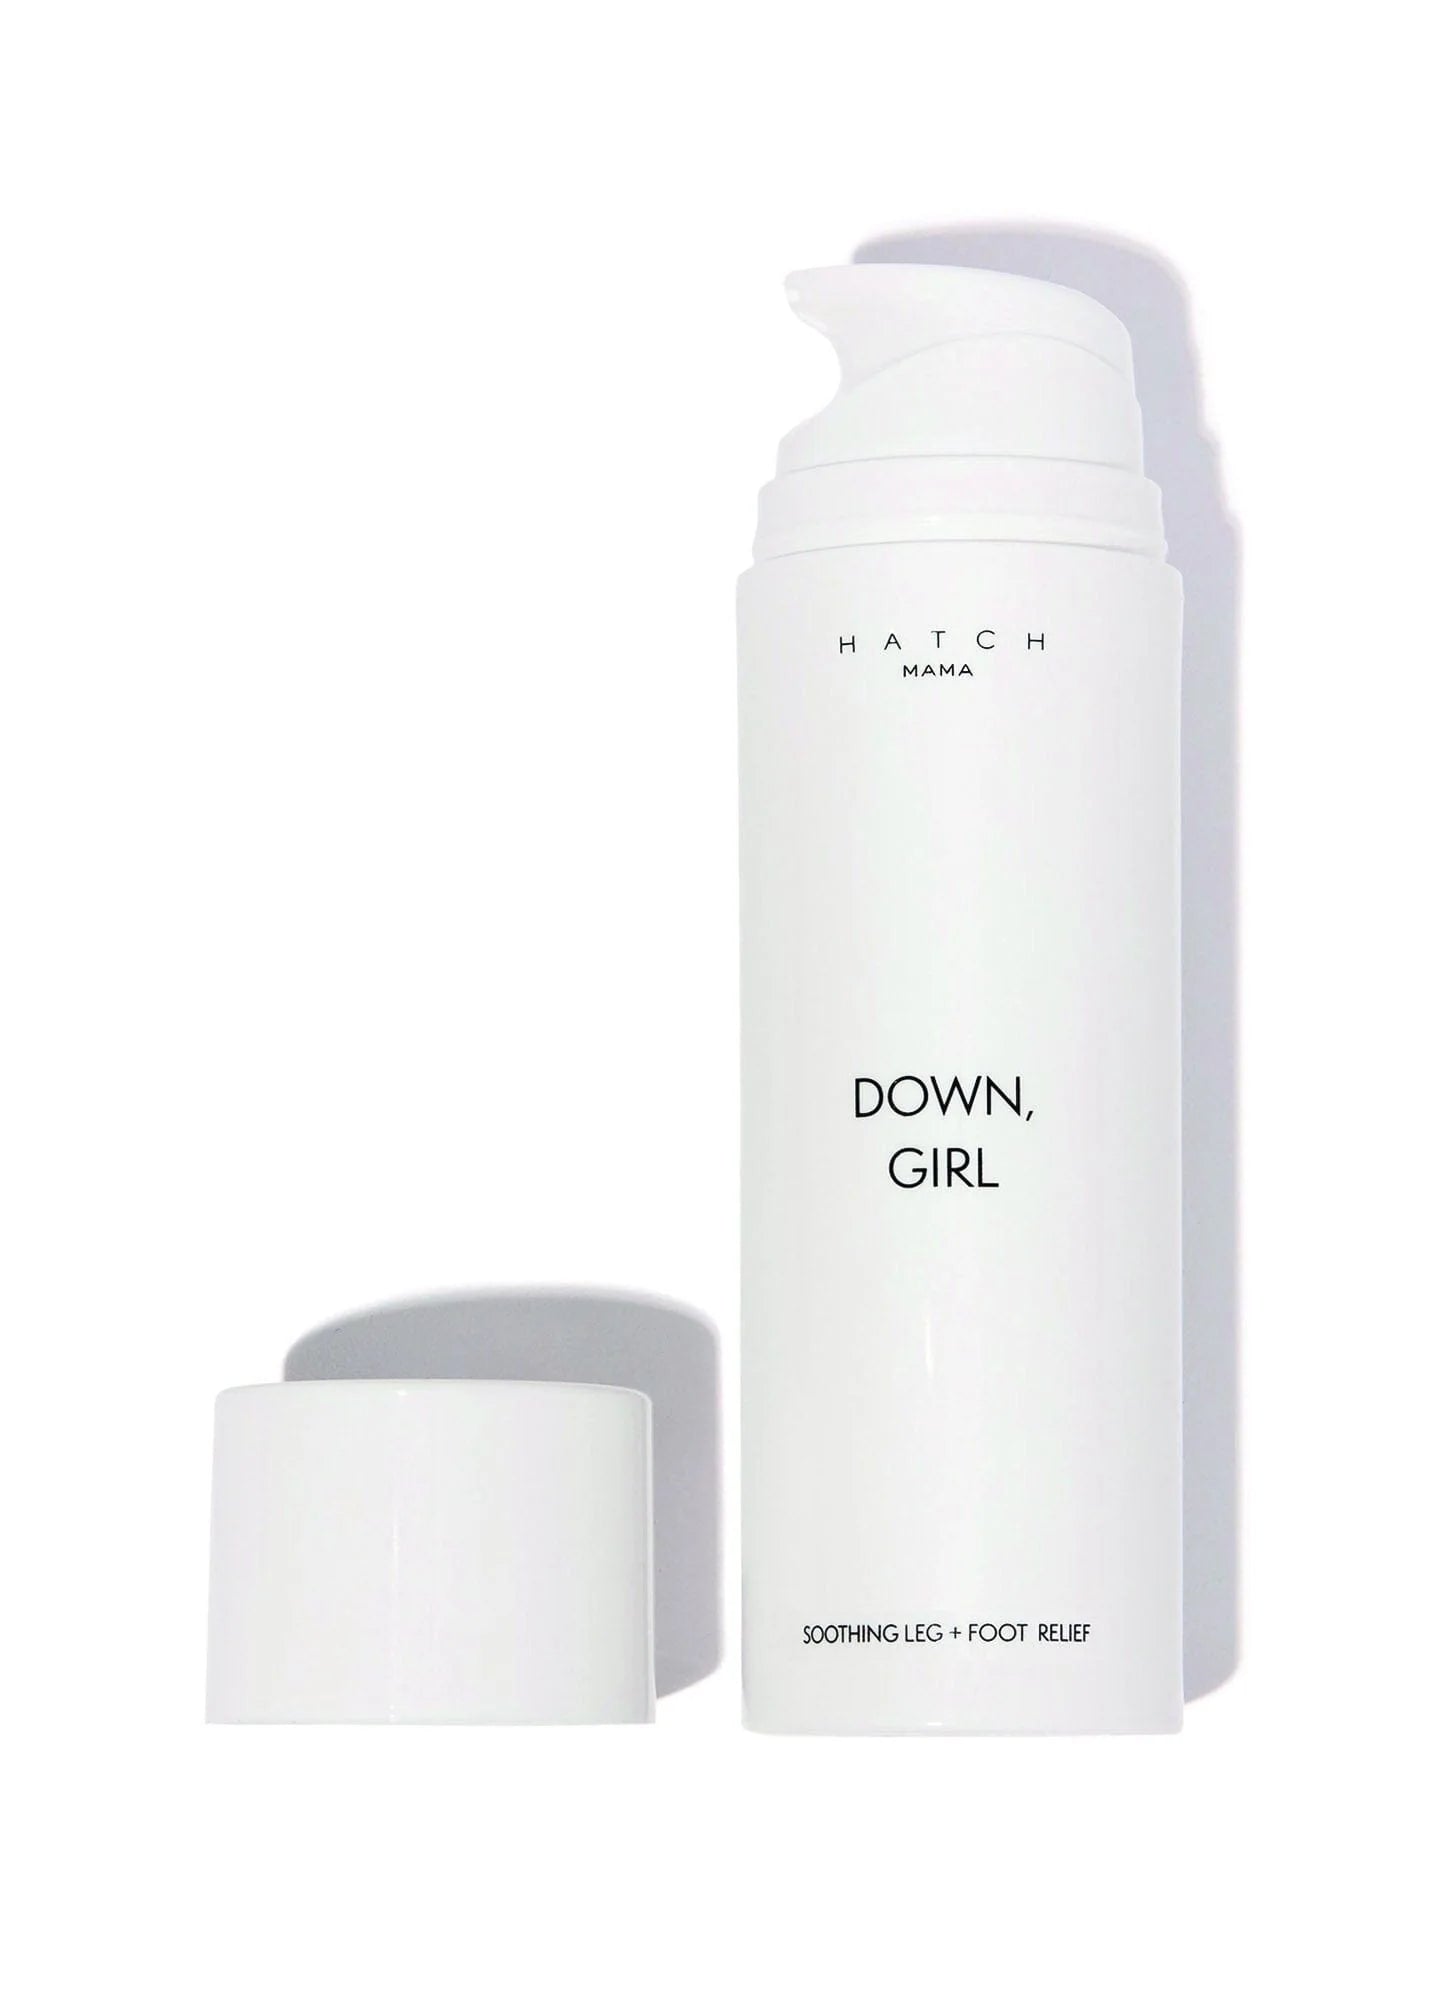 Down, Girl - Soothing Leg + Foot Relief